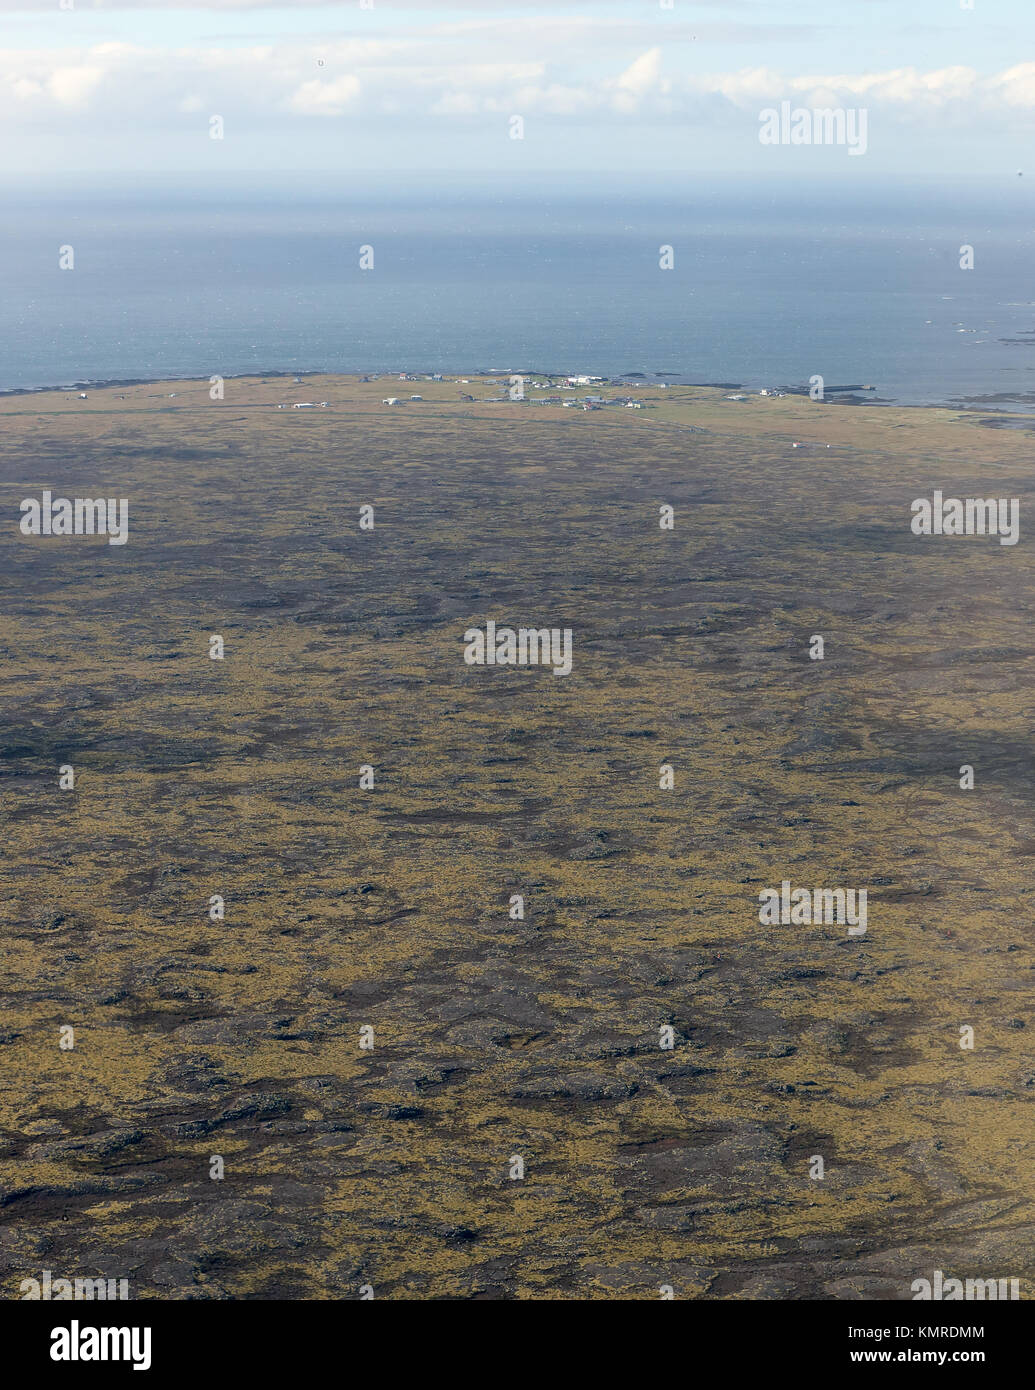 Flying in to Keflavik over the flat lava flow landscape of southwestern Iceland. Stock Photo